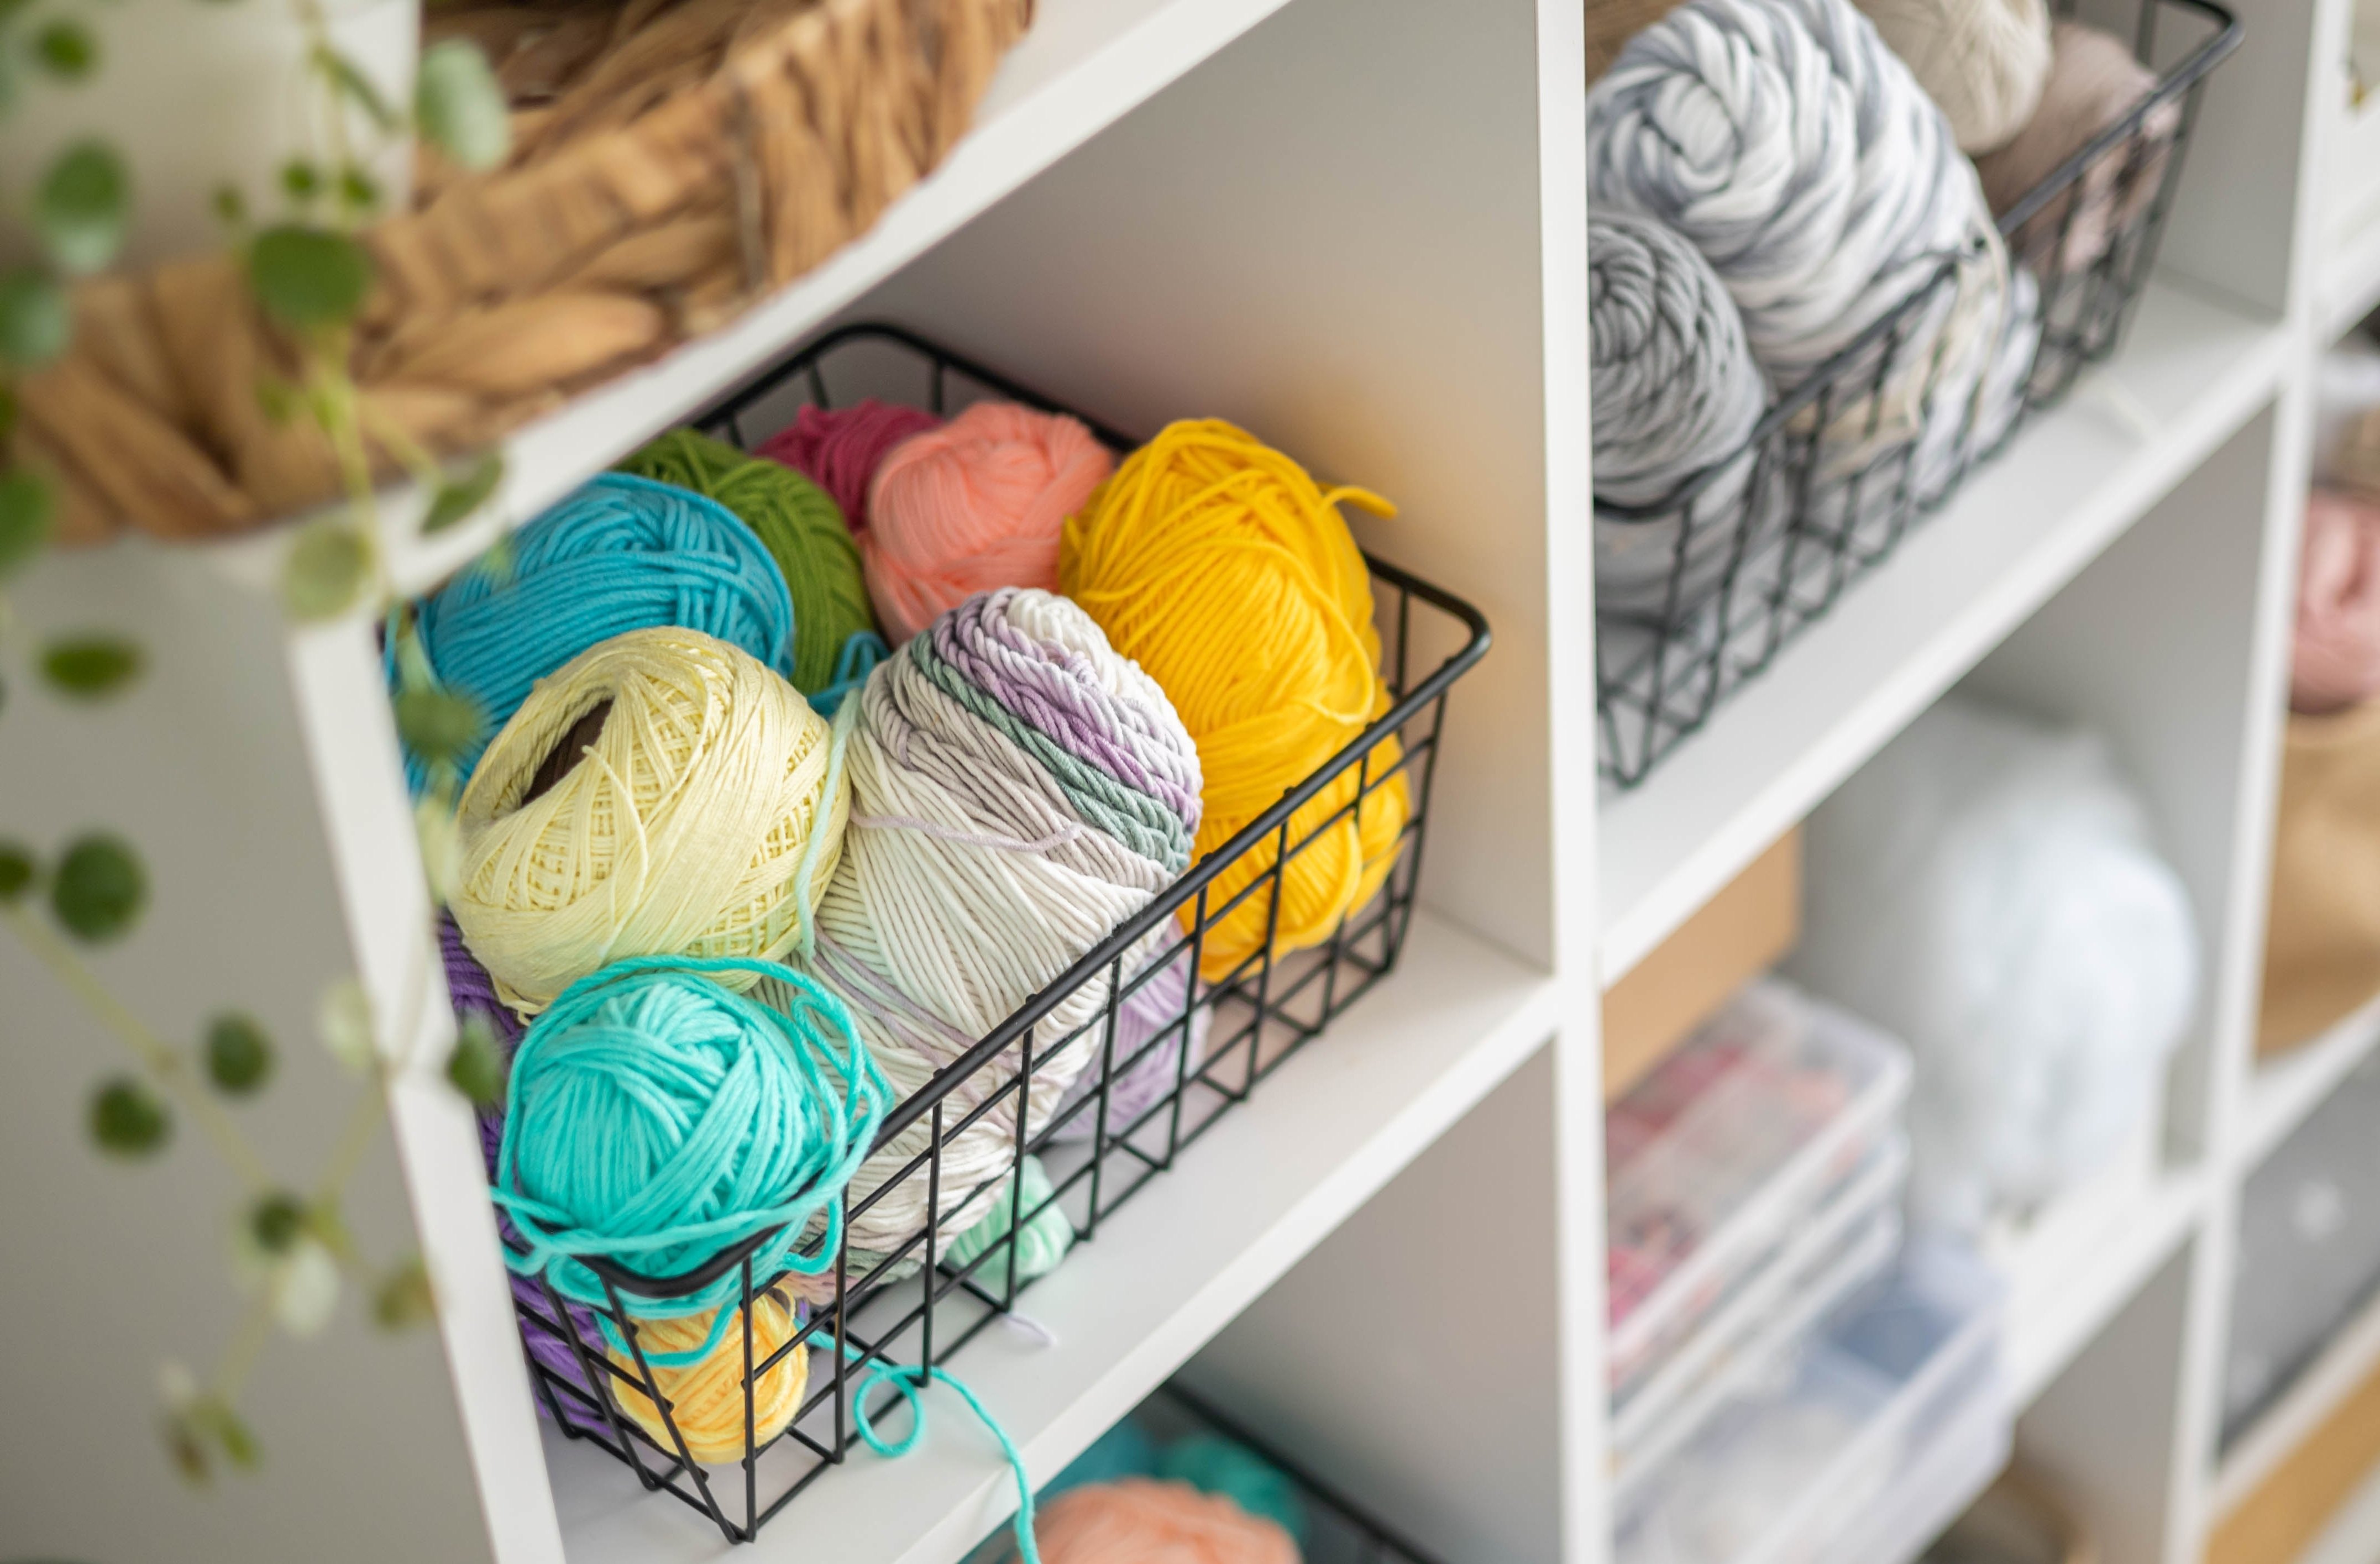 Yarn and other hobby supplies organized in a storage cupboard for a crafty girlfriend.